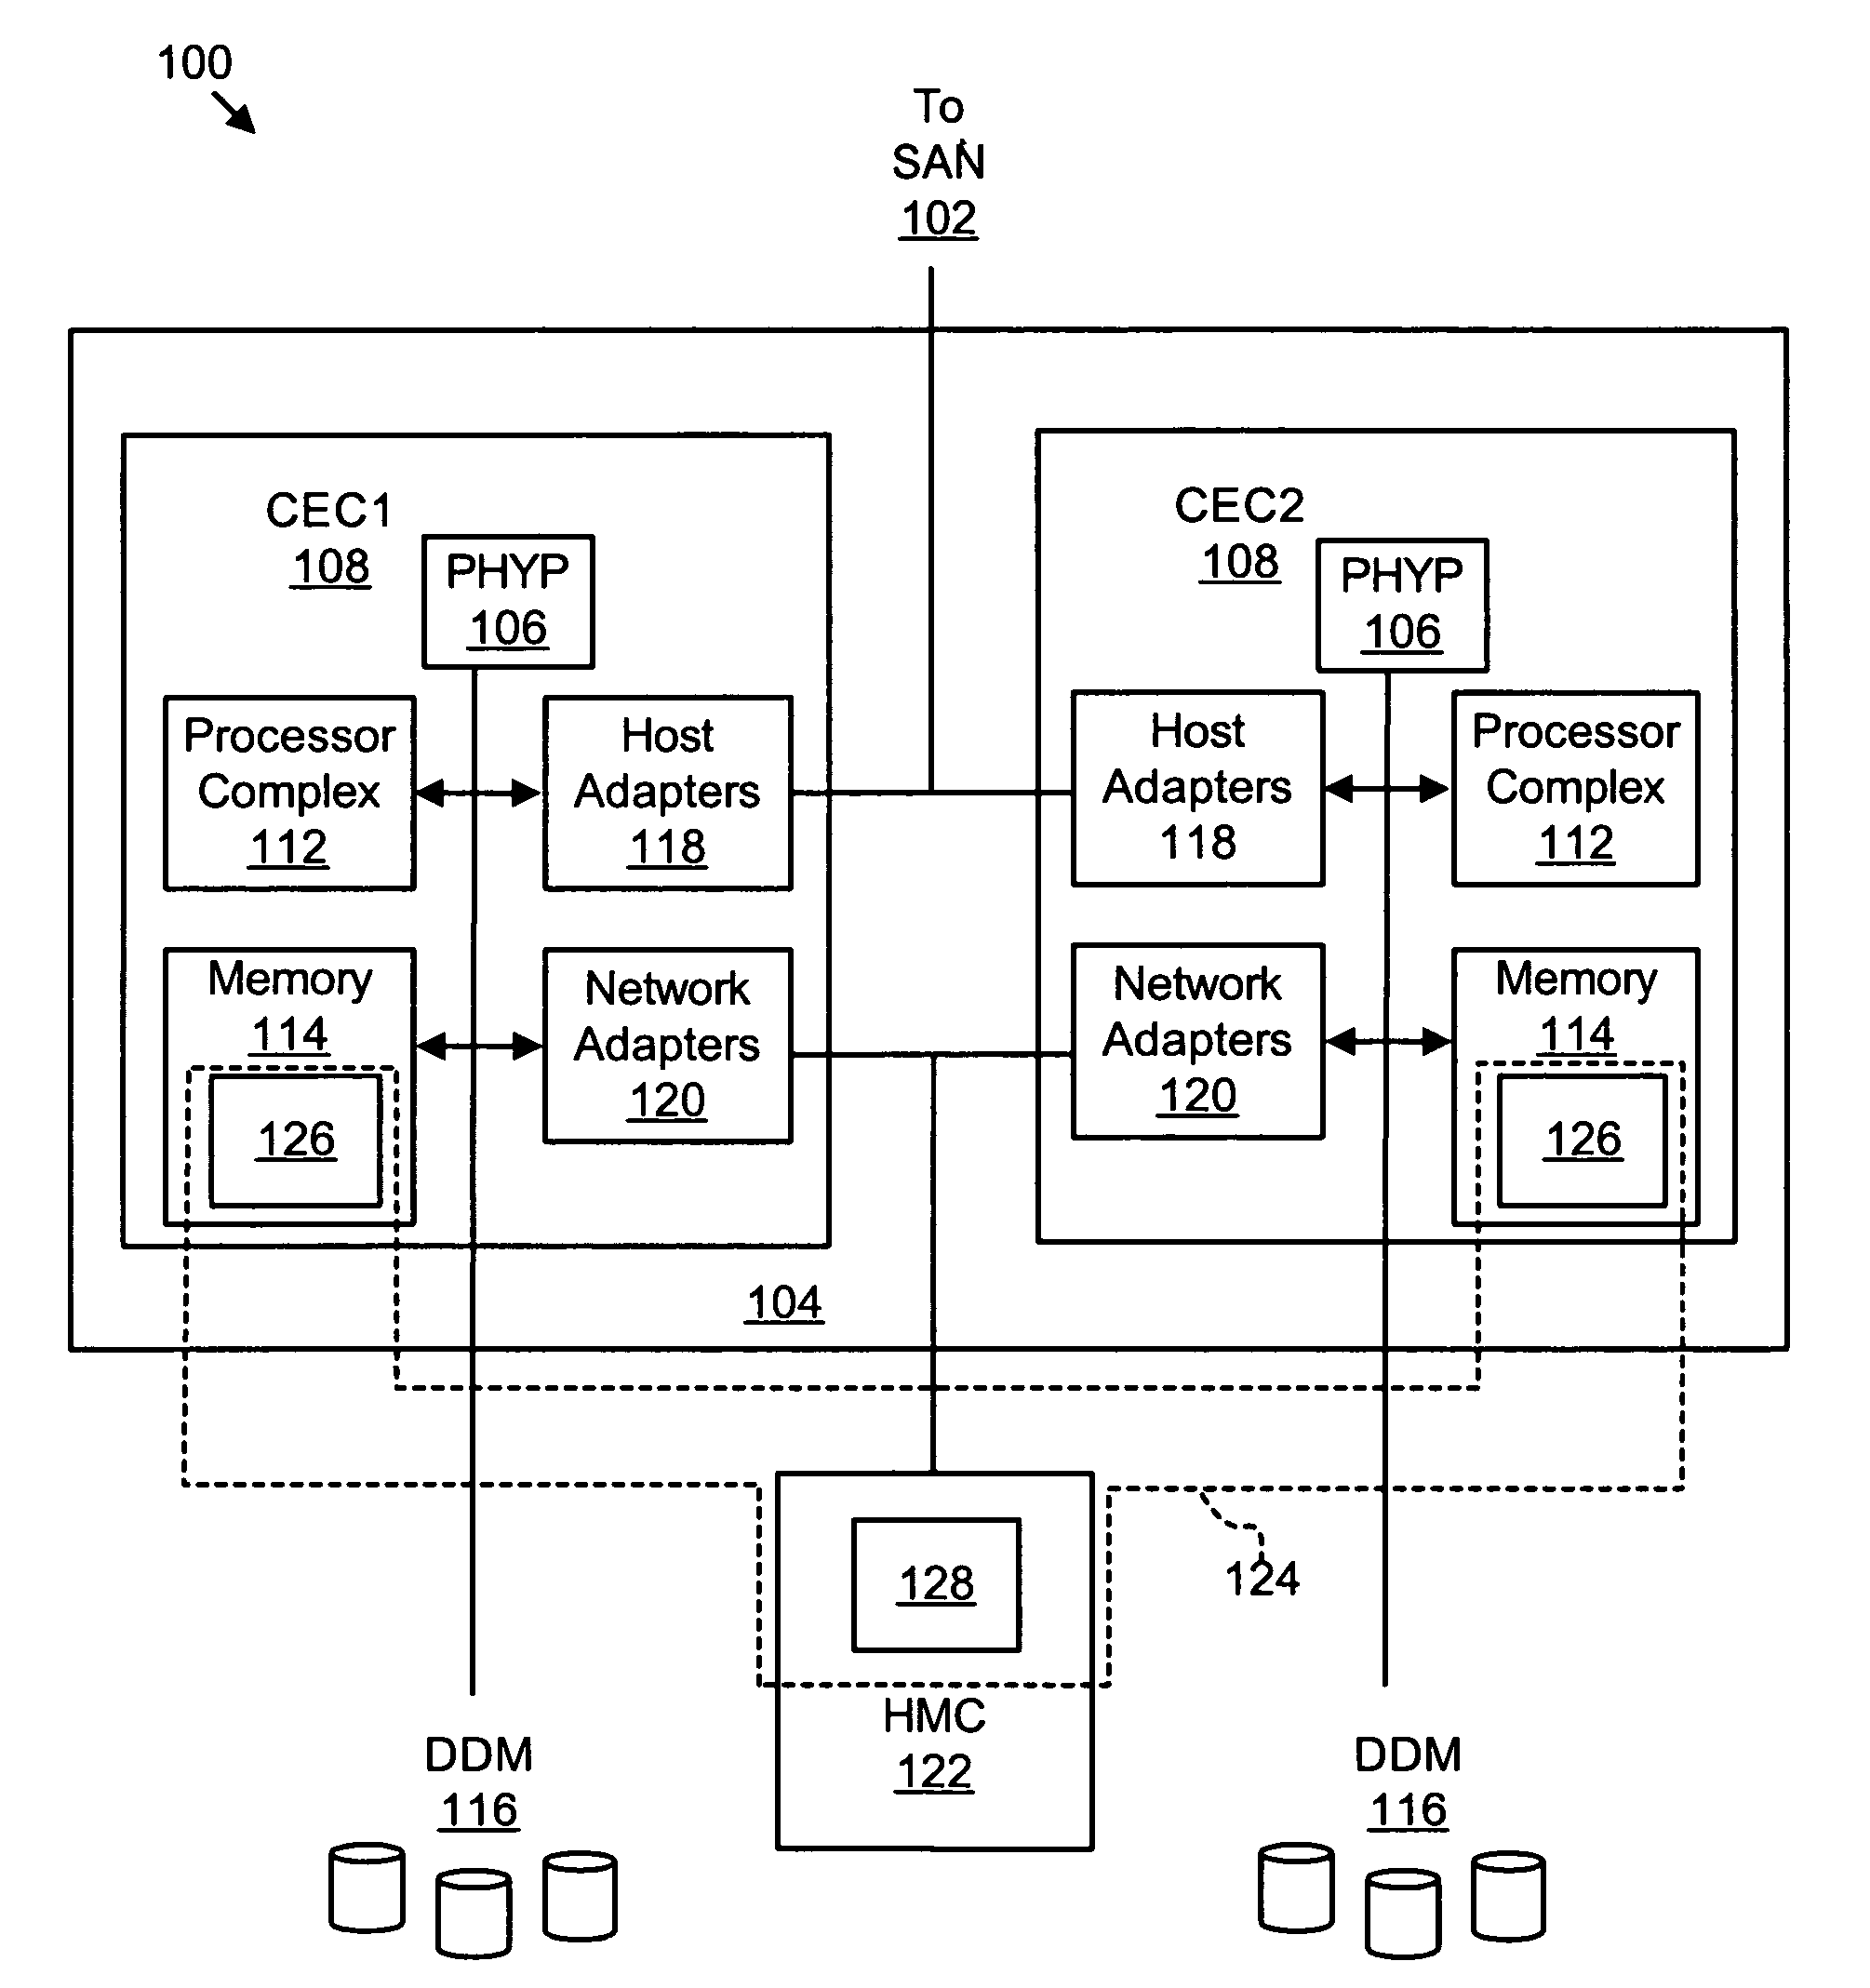 Apparatus, system, and method for facilitating monitoring and responding to error events